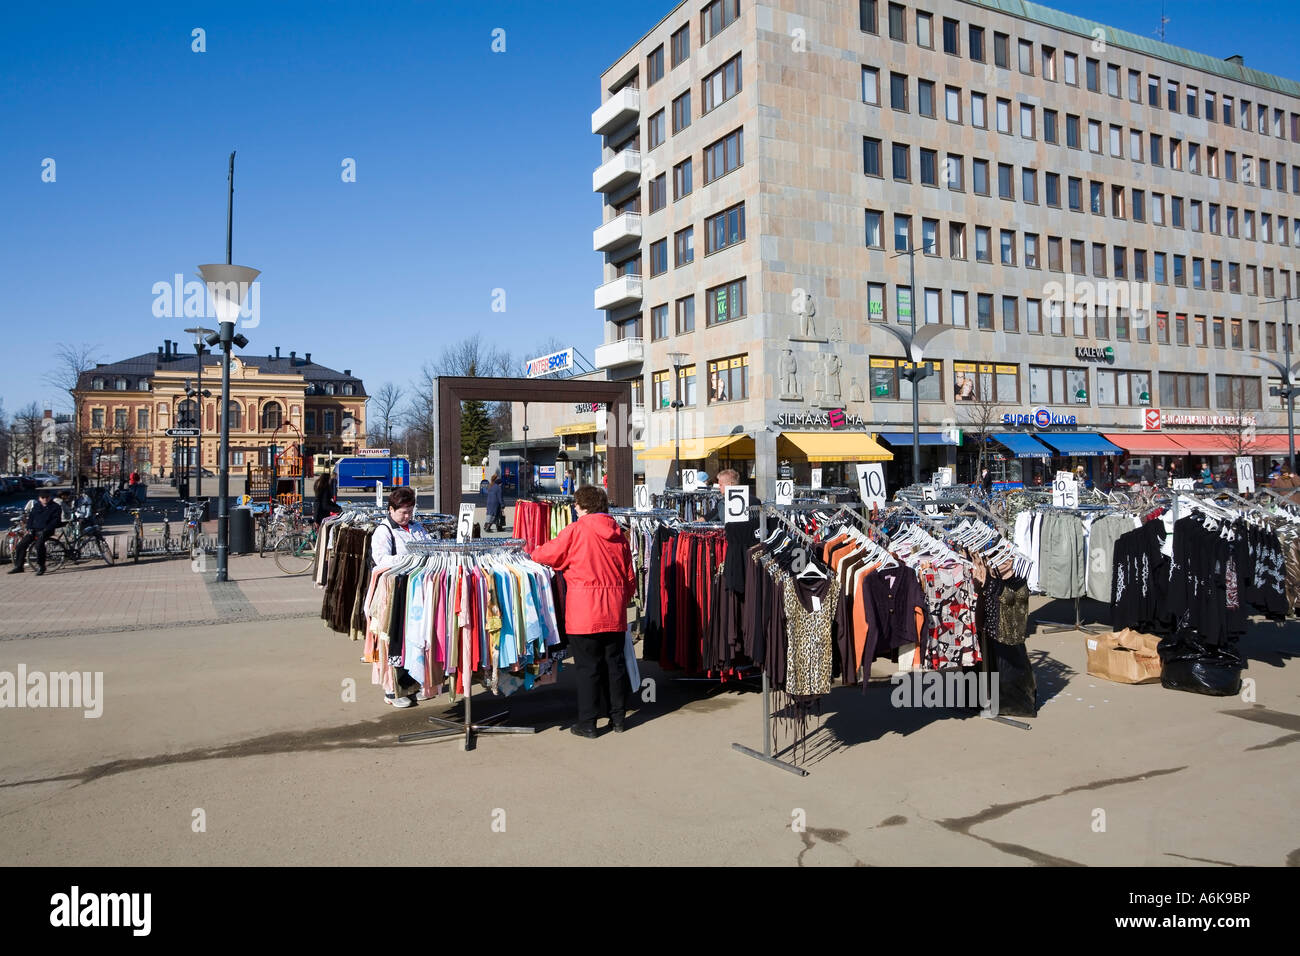 clothes selling in market square, Joensuu Finland Stock Photo